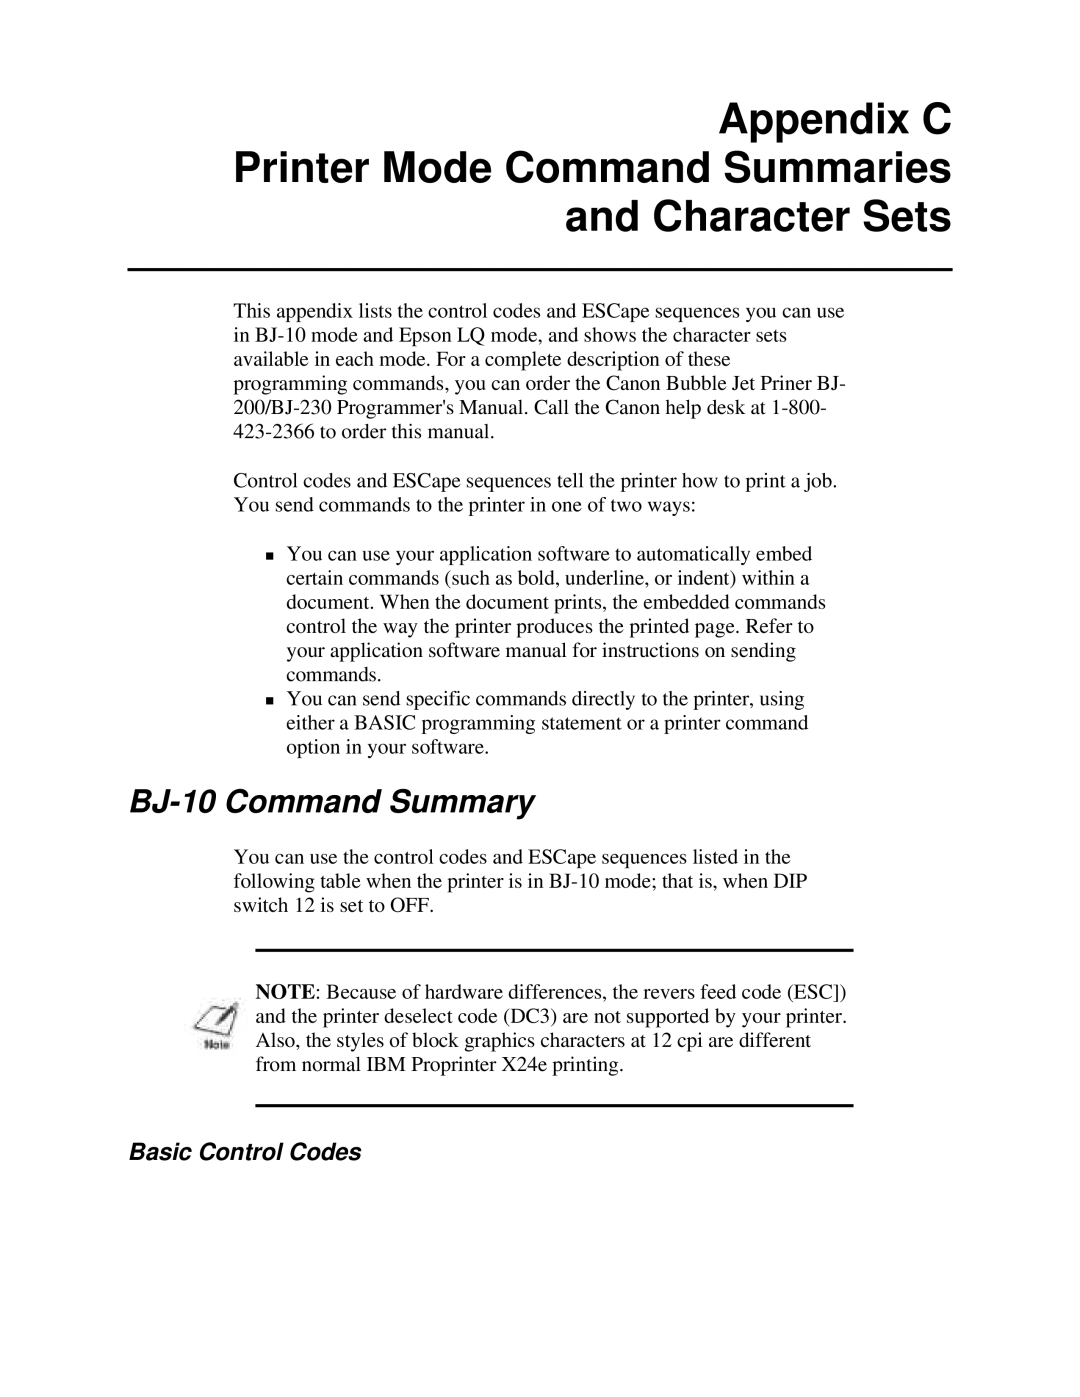 Canon BJ-230 Appendix C Printer Mode Command Summaries and Character Sets, BJ-10 Command Summary, Basic Control Codes 